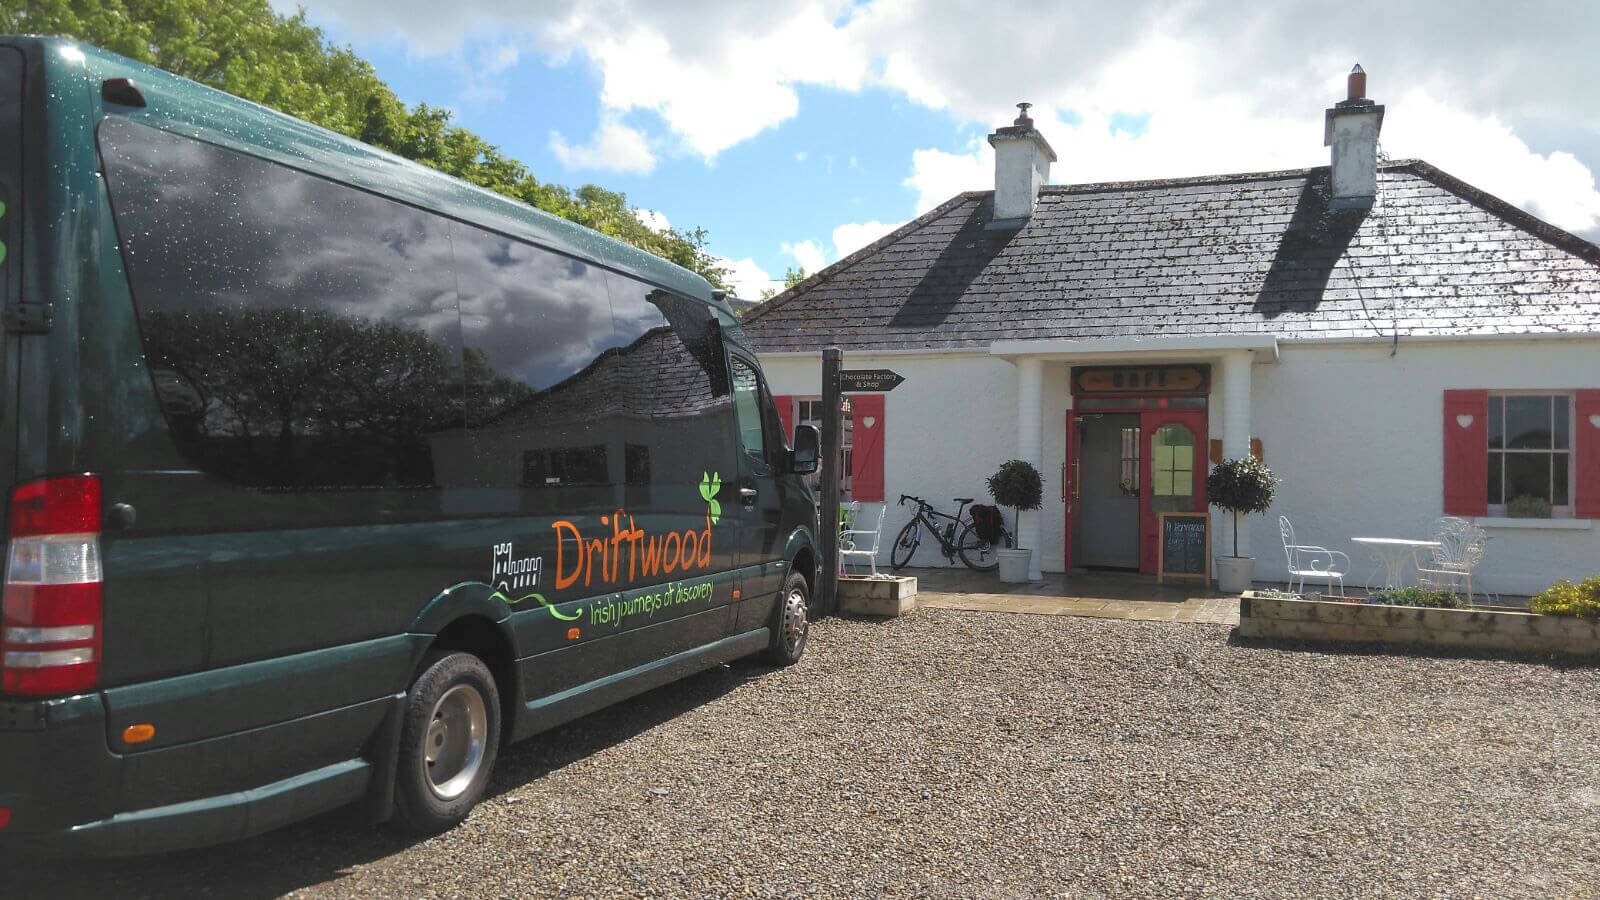 Driftwood tour vehicle parked at Hazel Mountain Chocolate Factory in Ireland